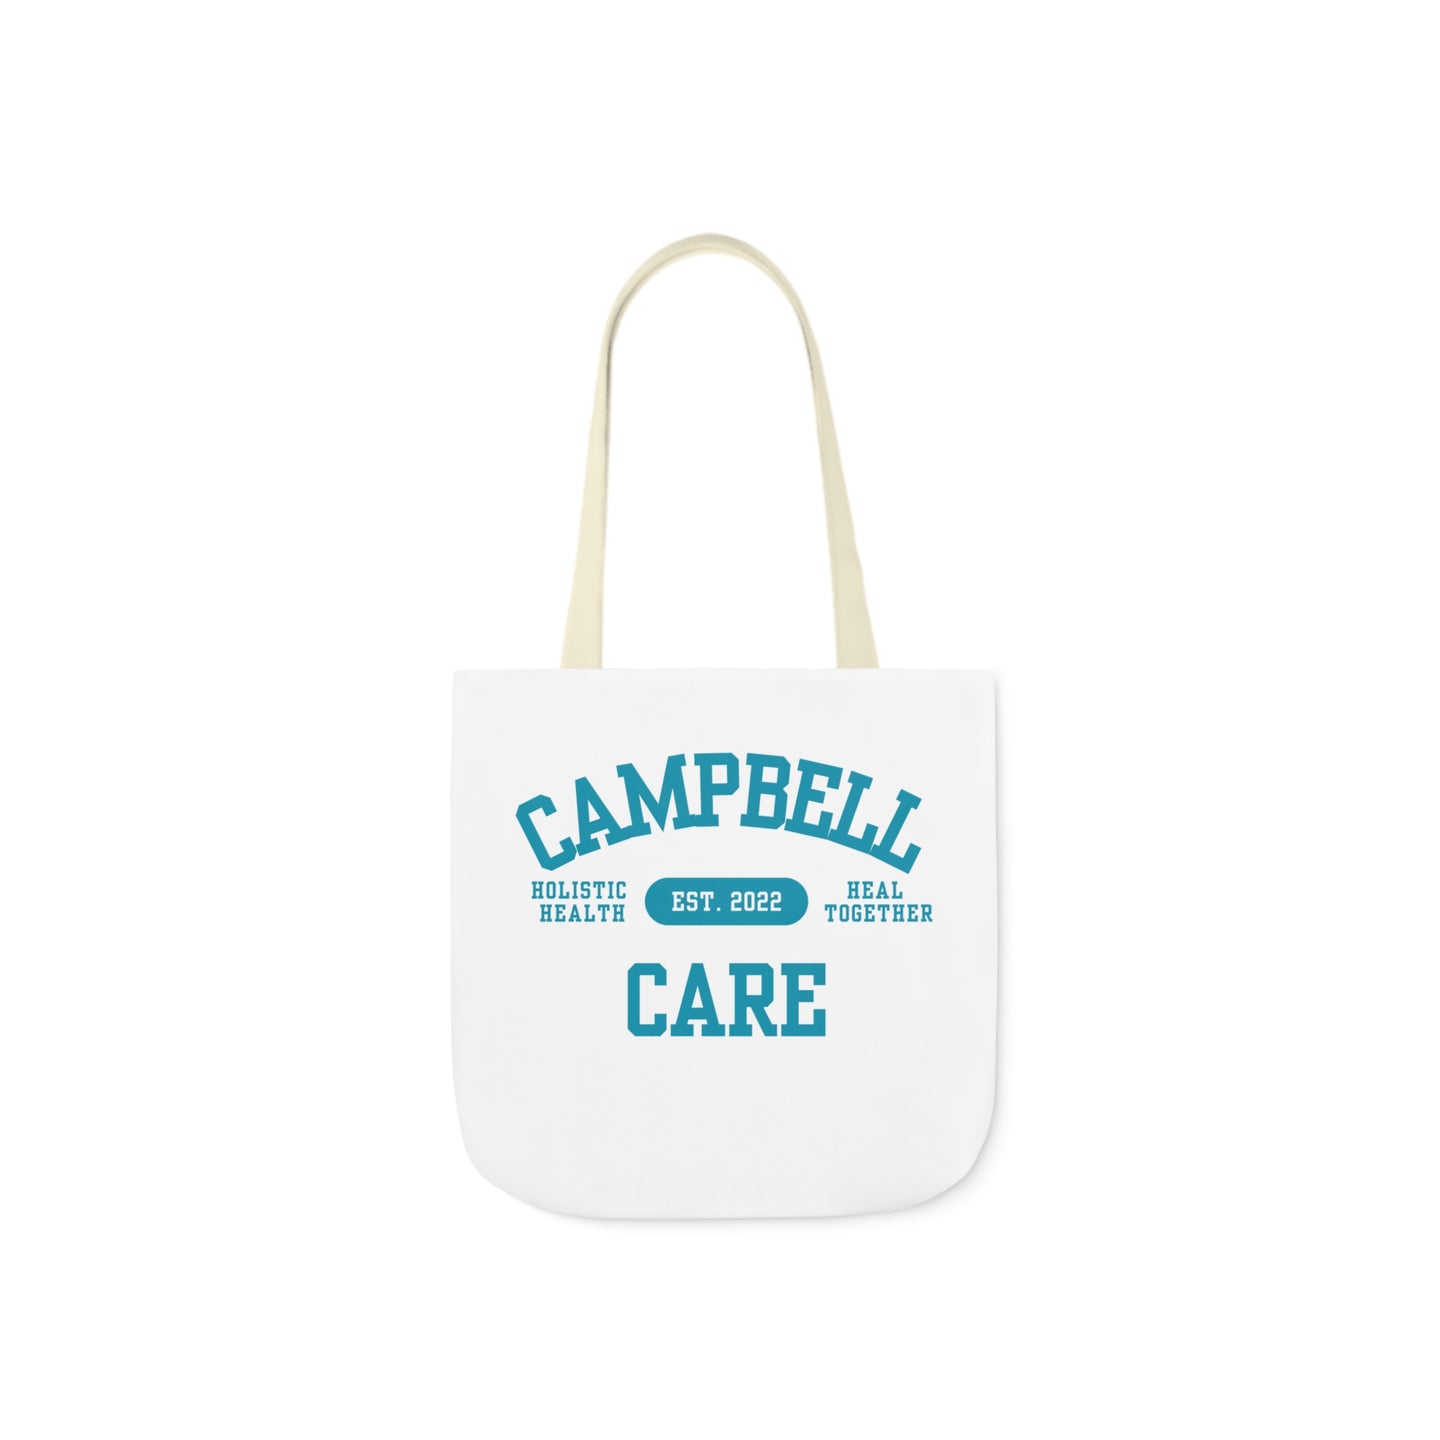 Campbell Care Tote Bag